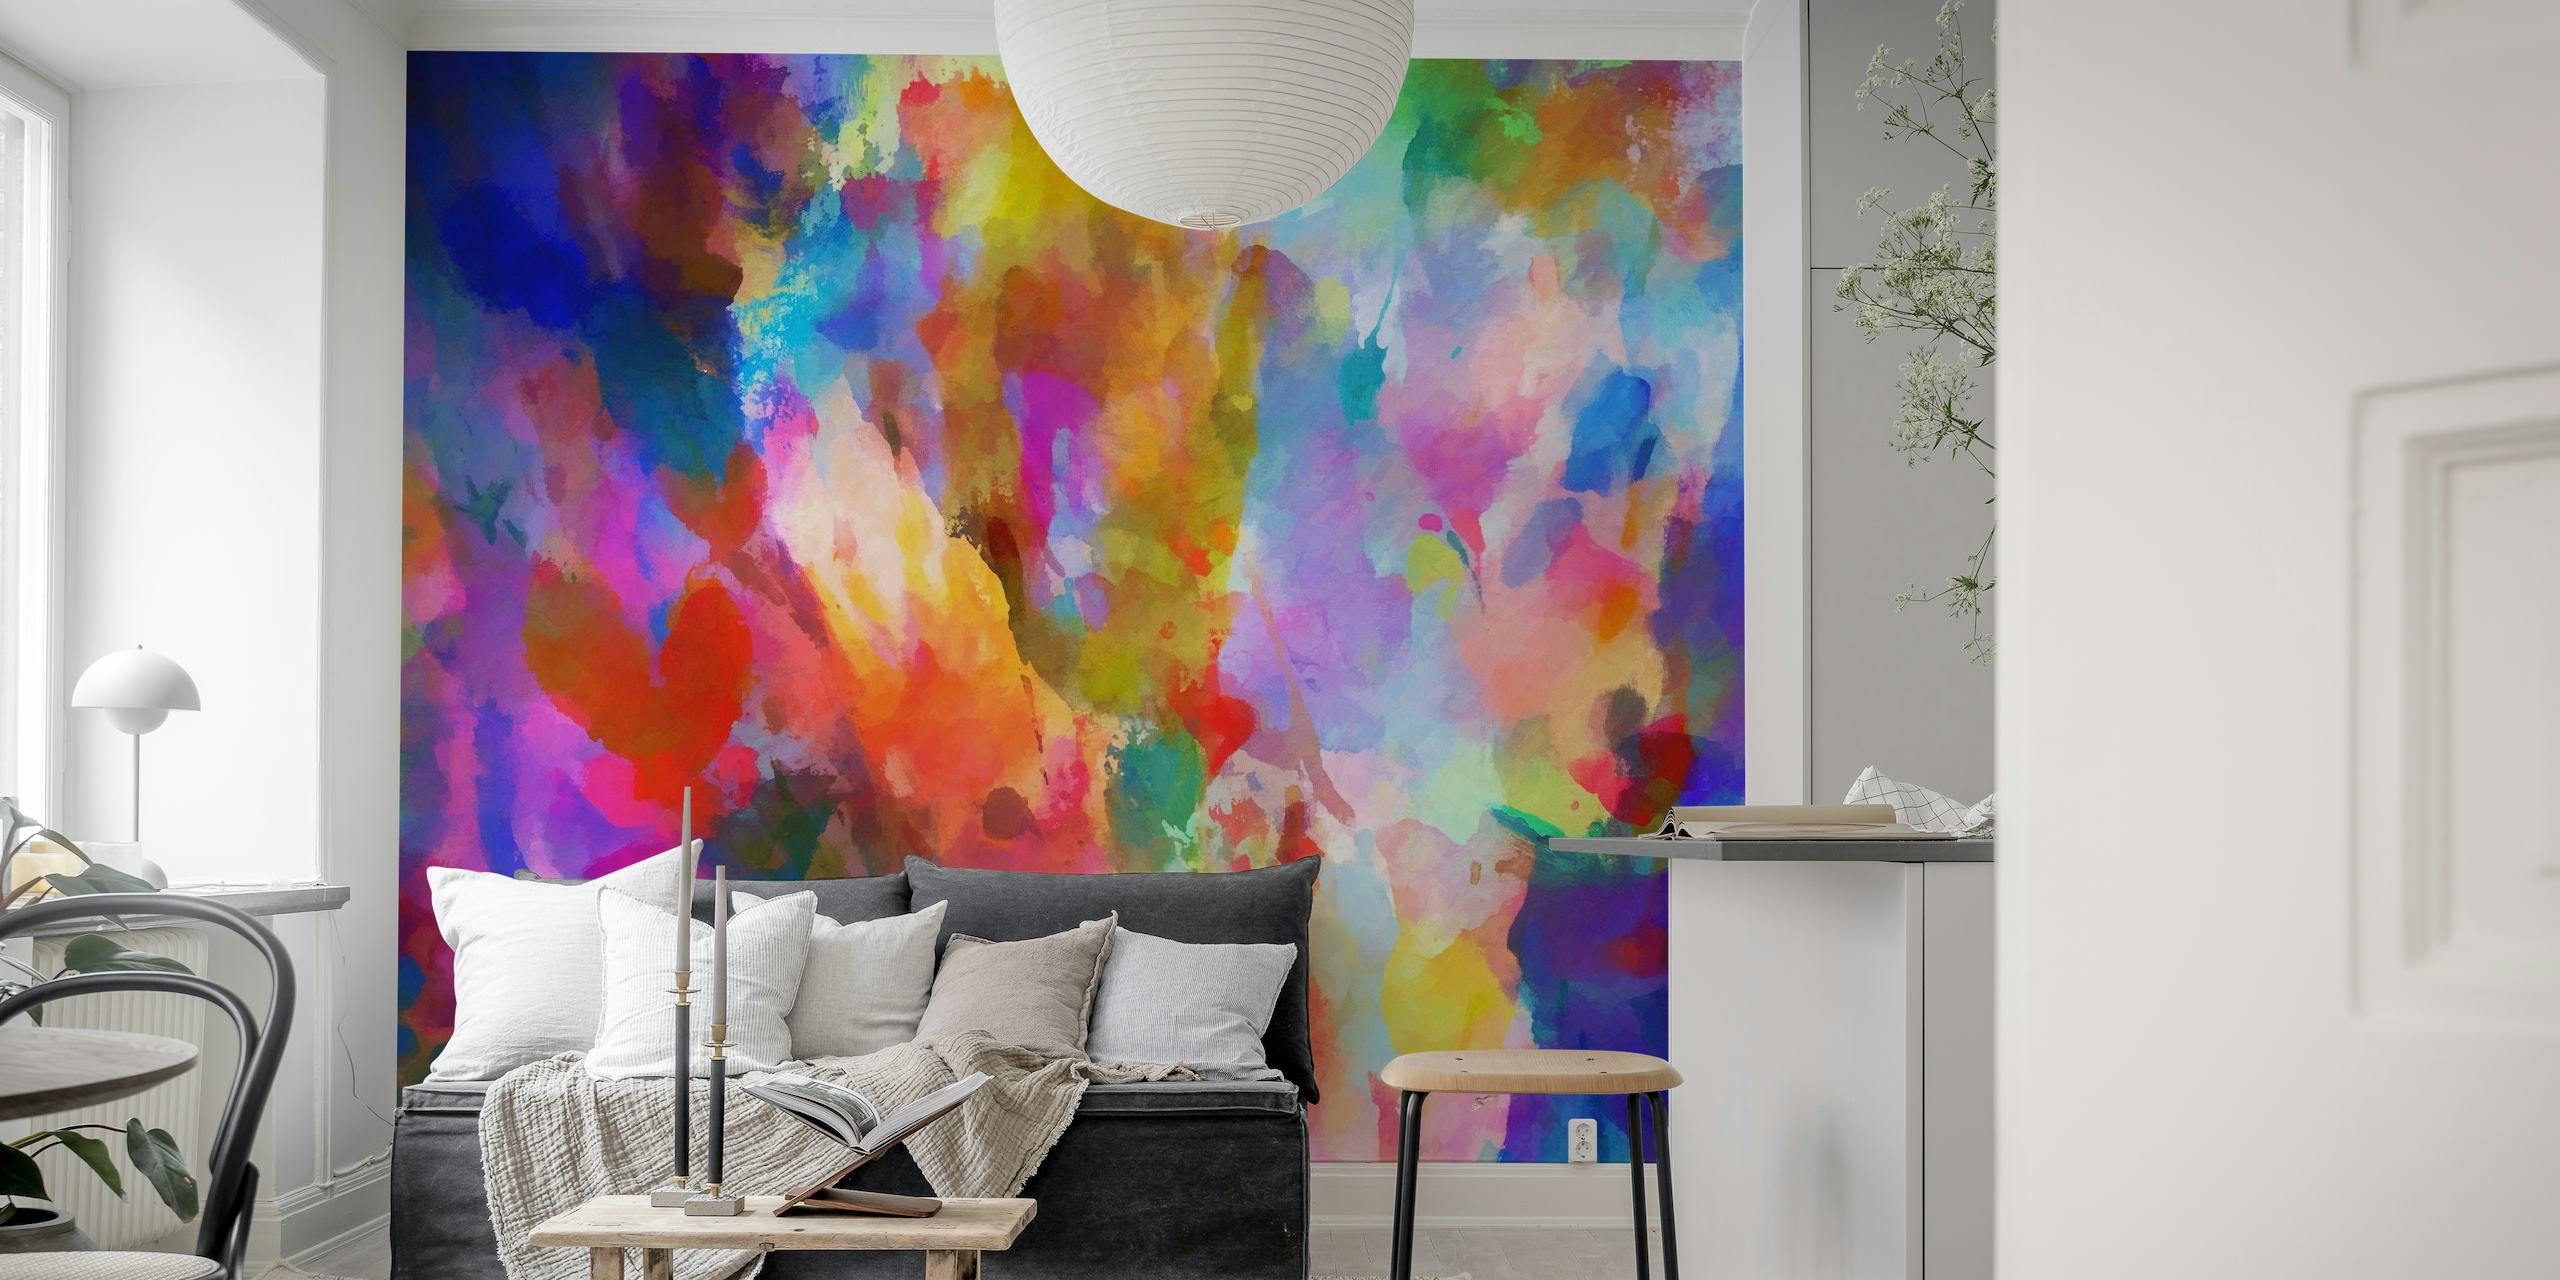 Colorful abstract art wall mural with vivid spectrum of blended hues